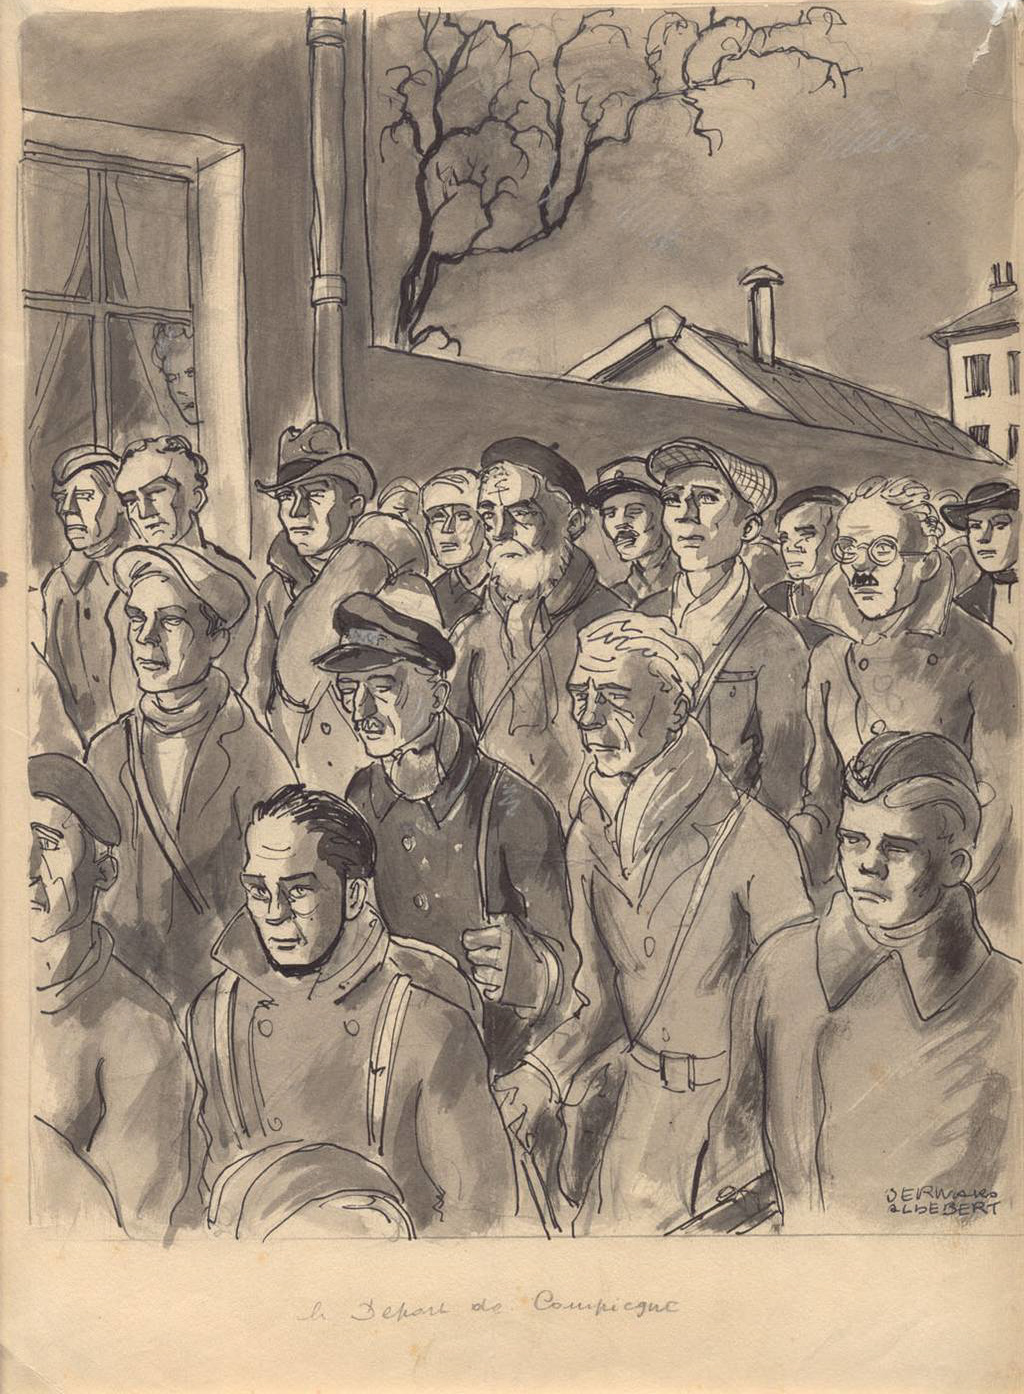 ”Departure from Compiègne”, drawing by the French survivor Bernard Aldebert, 1945/46. (Mauthausen Memorial / Collections)